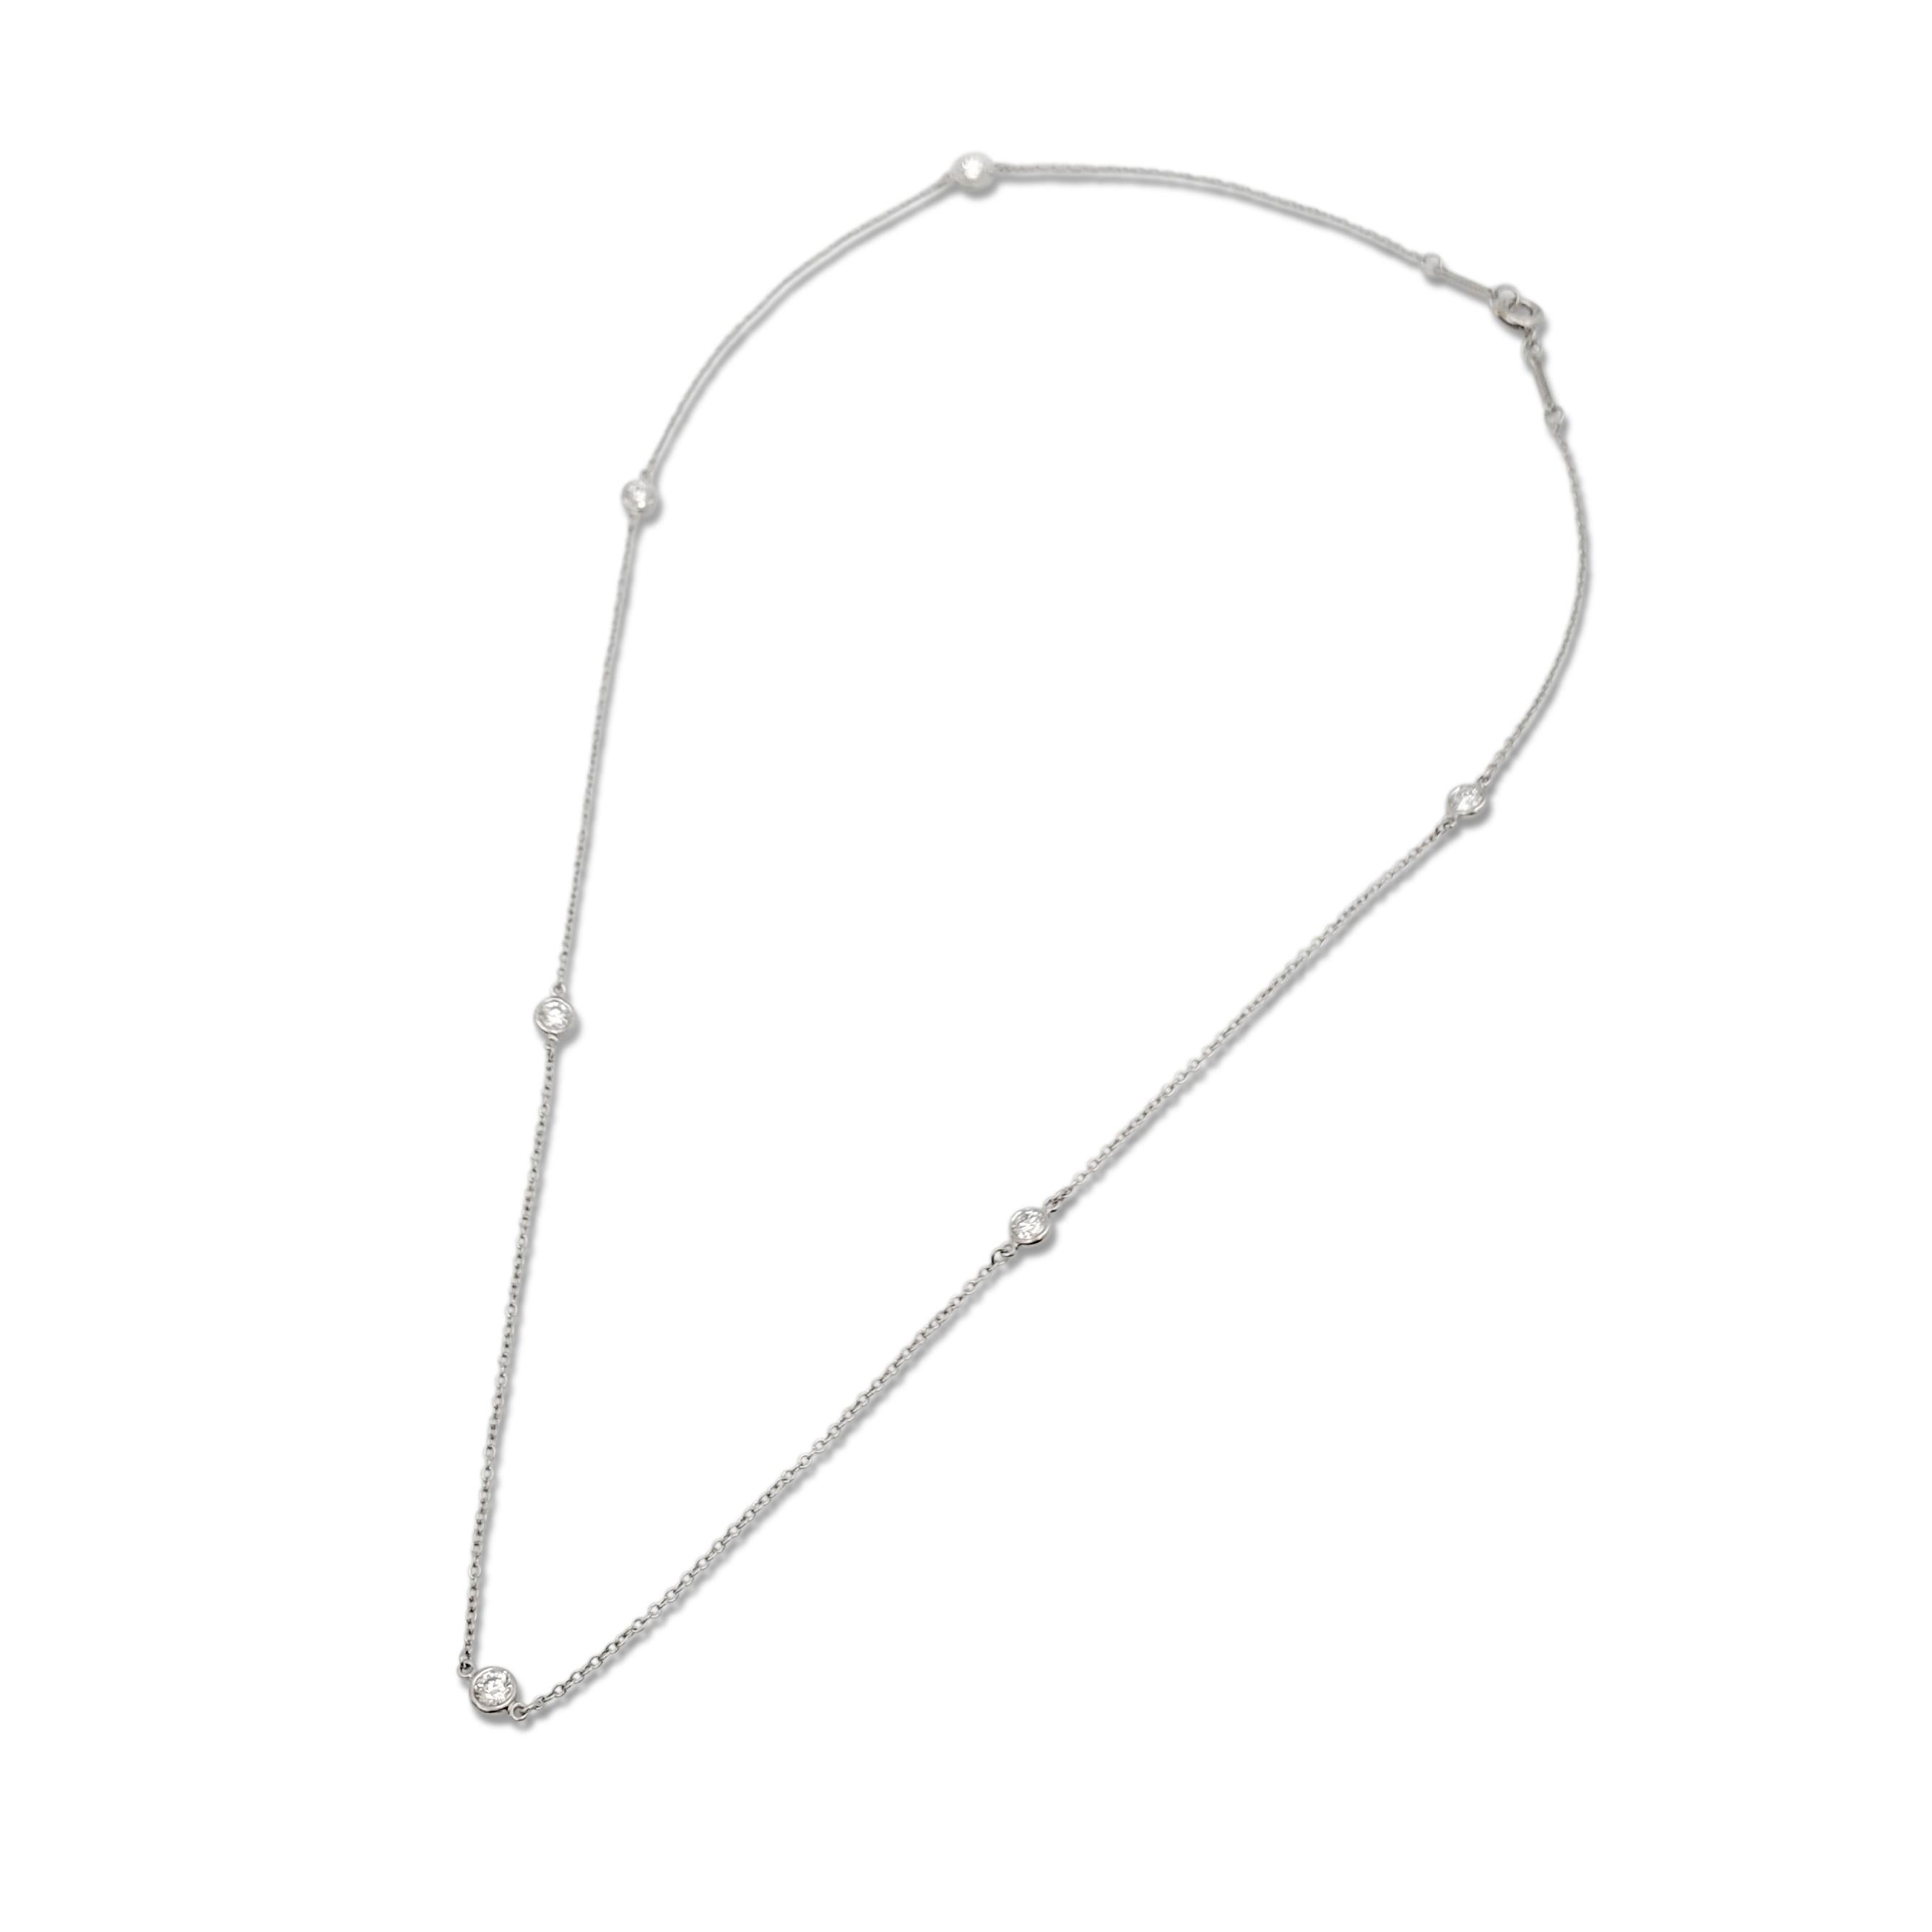 Round Cut Elsa Peretti for Tiffany & Co. Platinum 'Diamonds by the Yard' Necklace